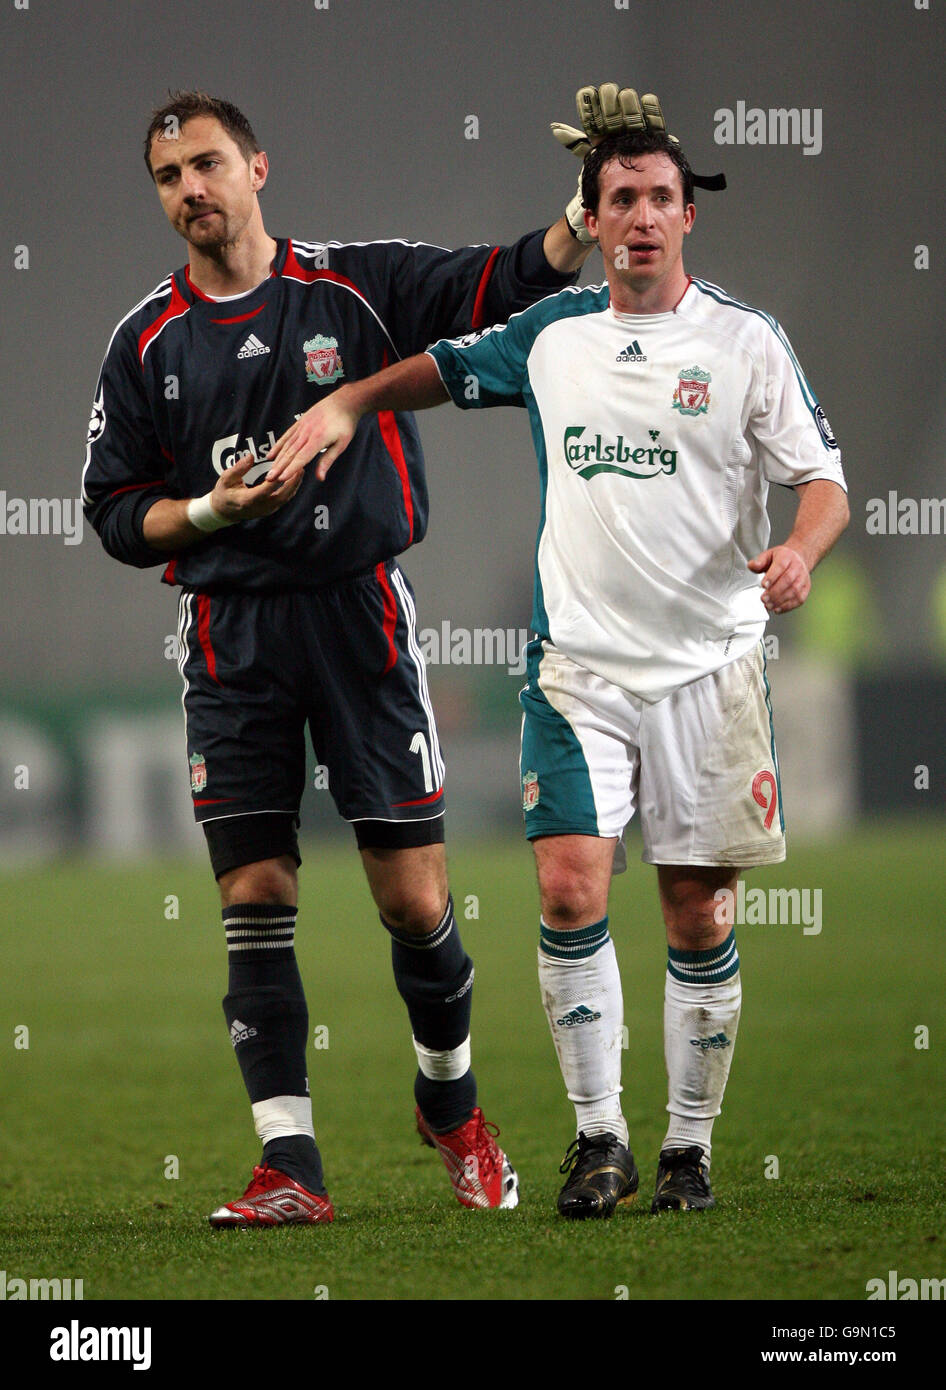 Soccer - UEFA Champions League - Group C - Galatasaray v Liverpool - Ataturk Olympic Stadium. Liverpool's Robbie Fowler and goalkeeper Jerzy Dudek after the game against Galatasaray Stock Photo